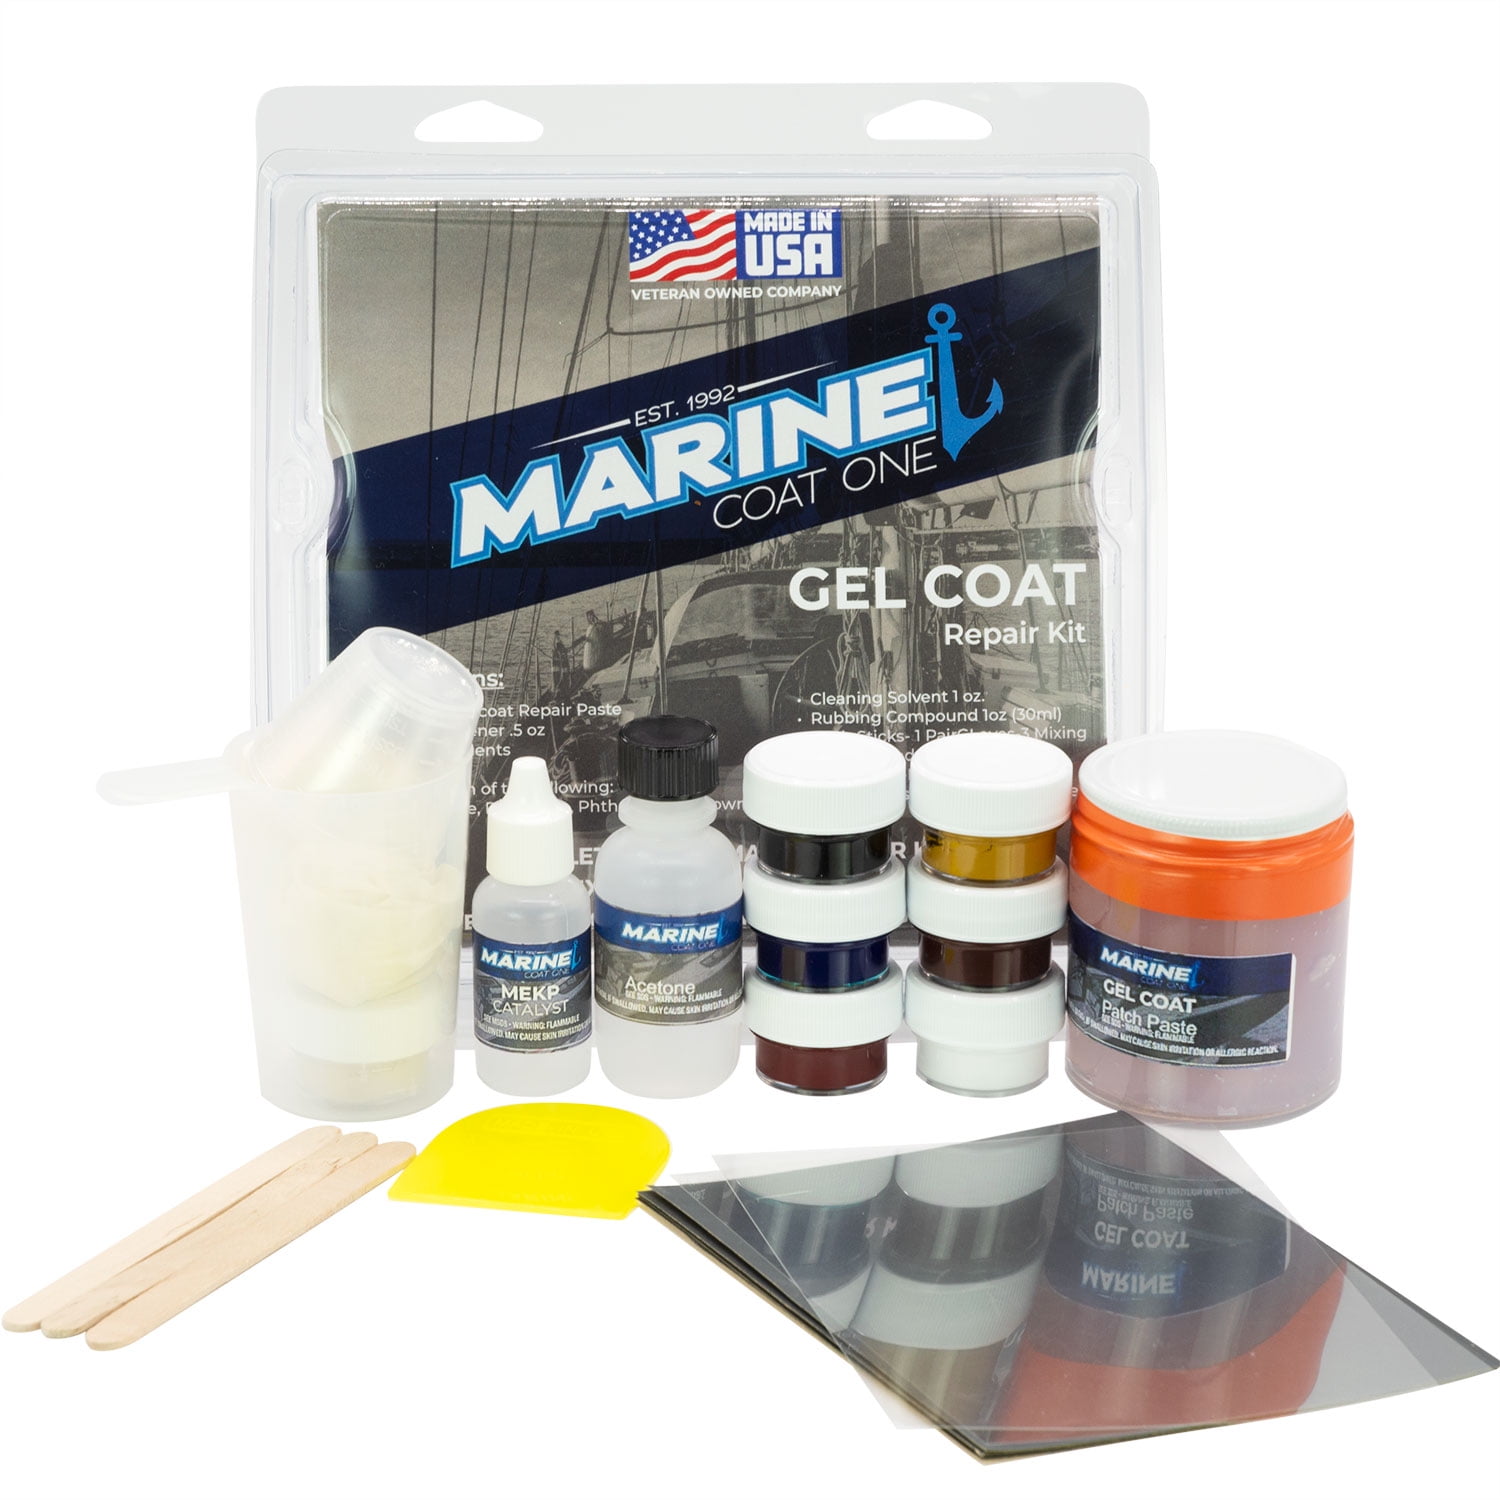 MarineCoat One Complete Premium Bass Boat Gel Coat Repair Kit Your Perfect Match Everytime (Silver)